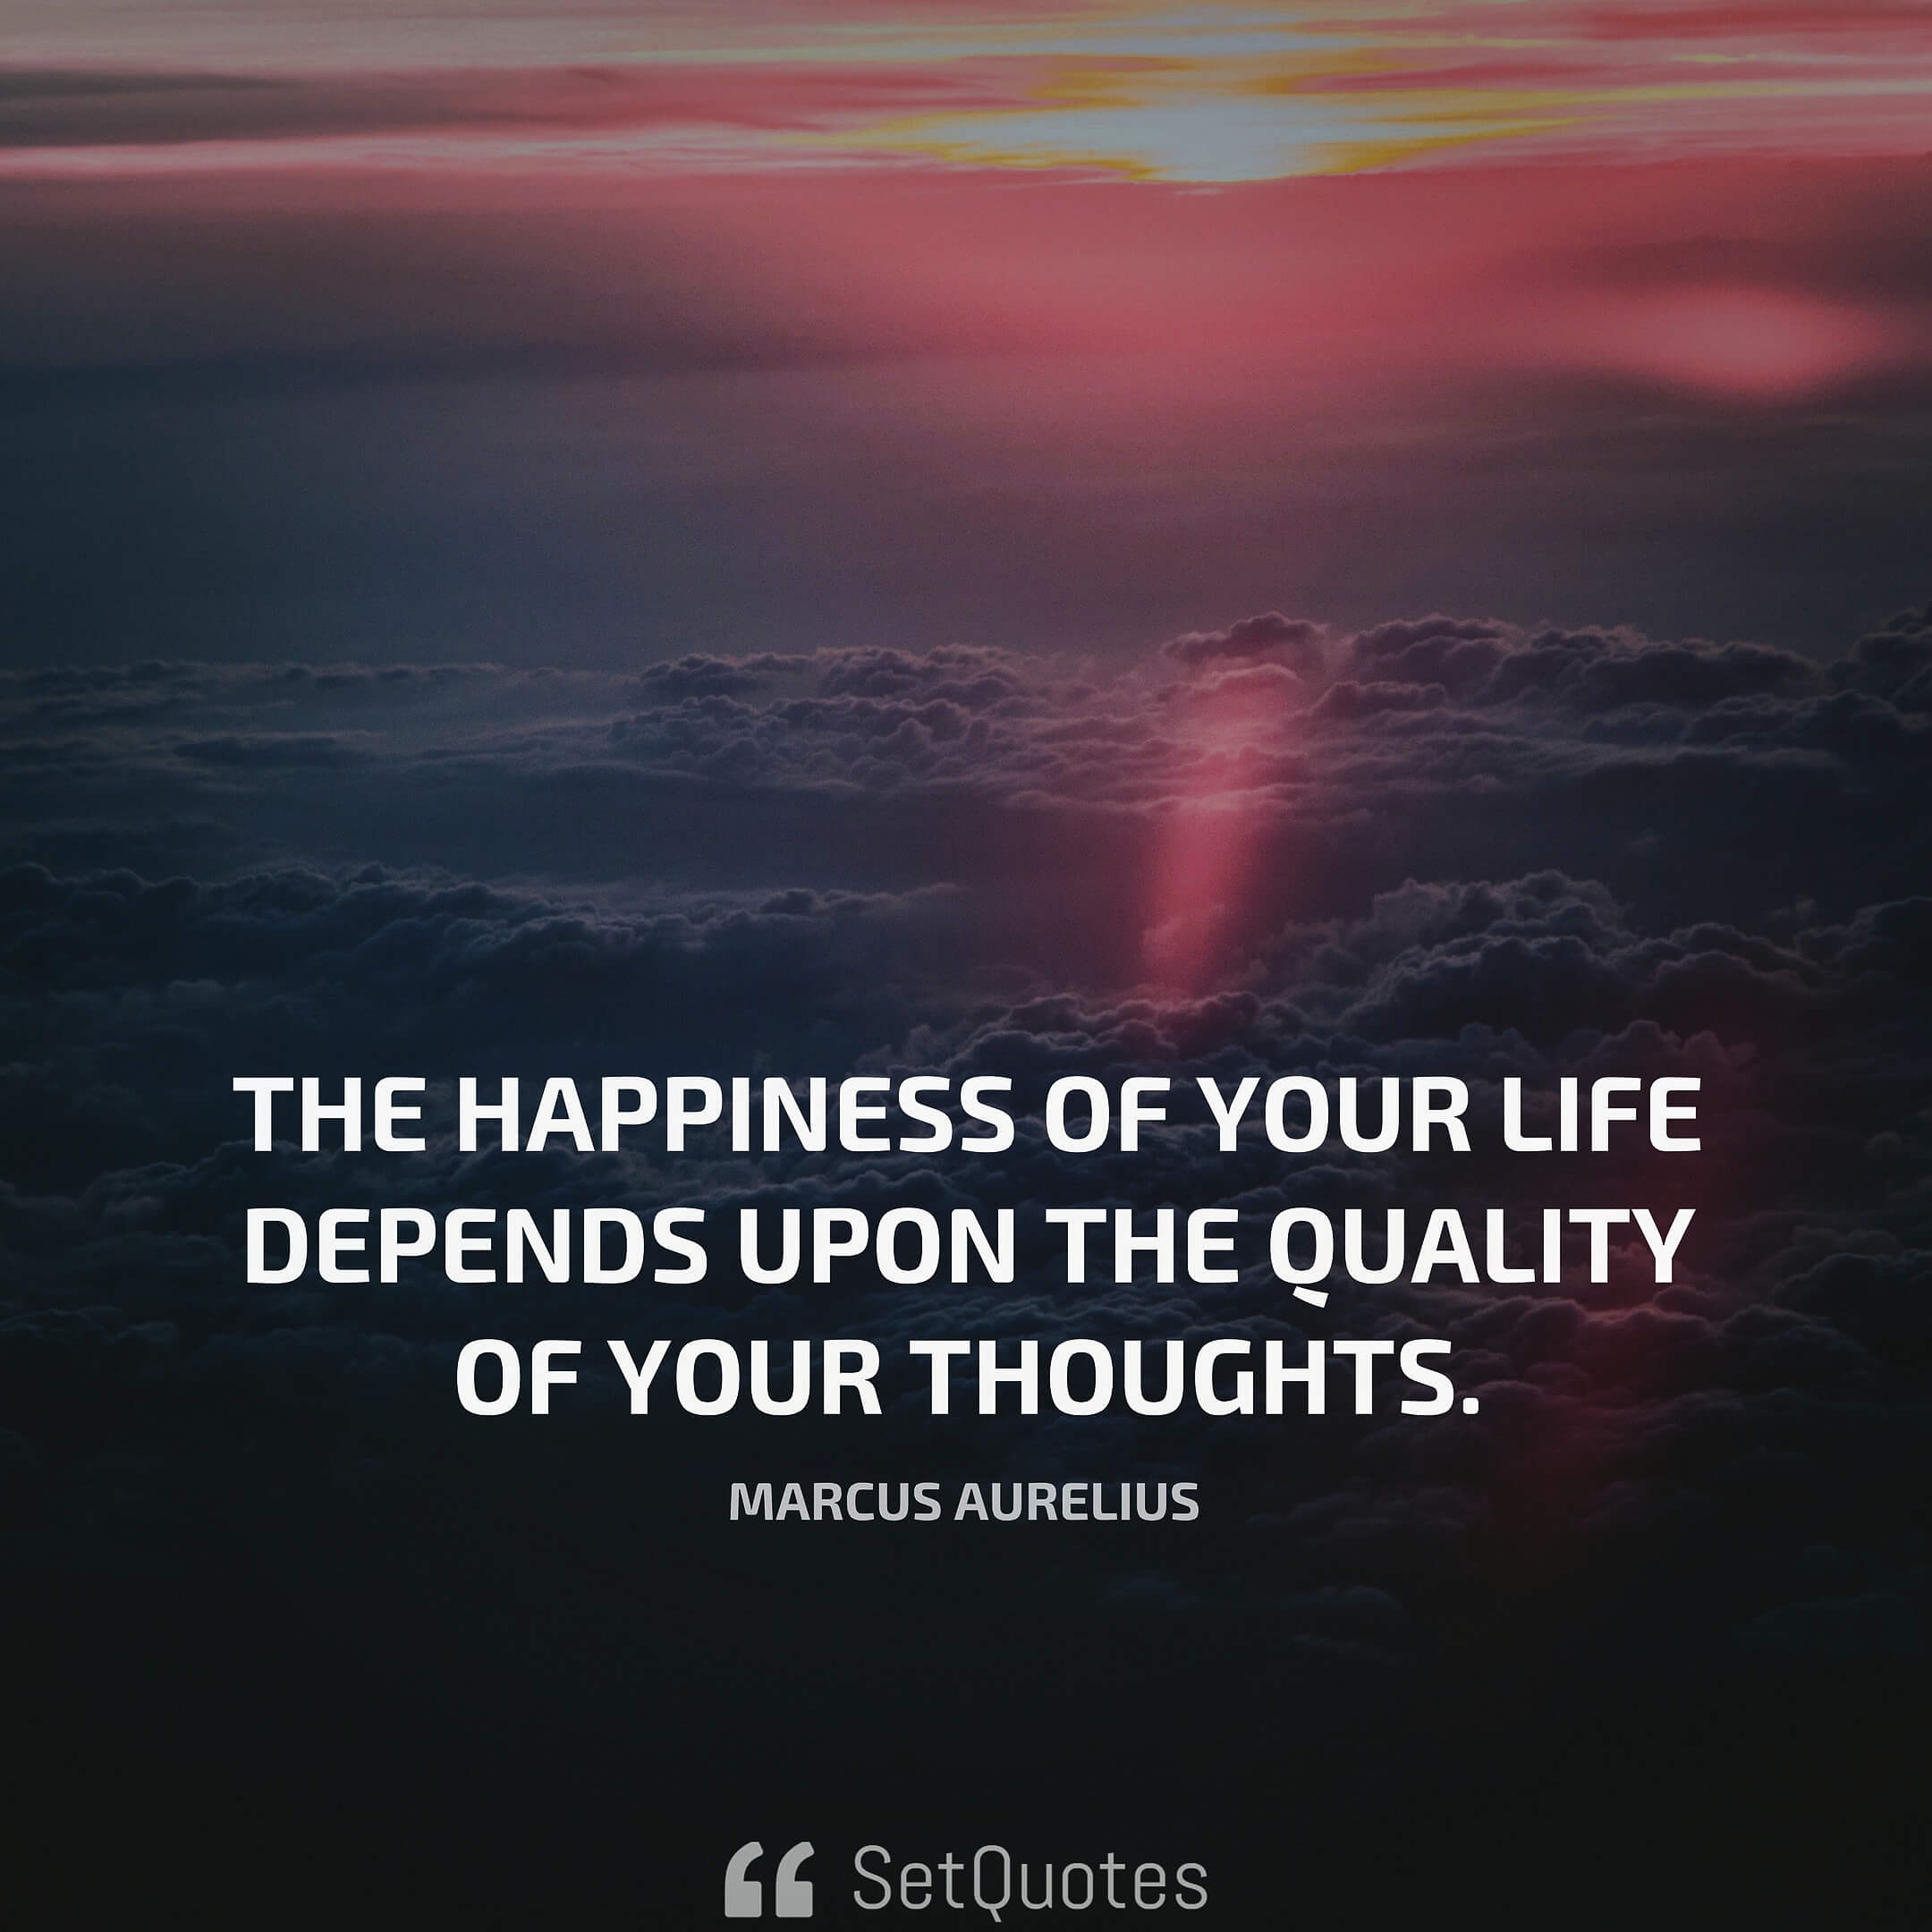 The happiness of your life depends upon the quality of your thoughts - Marcus Aurelius